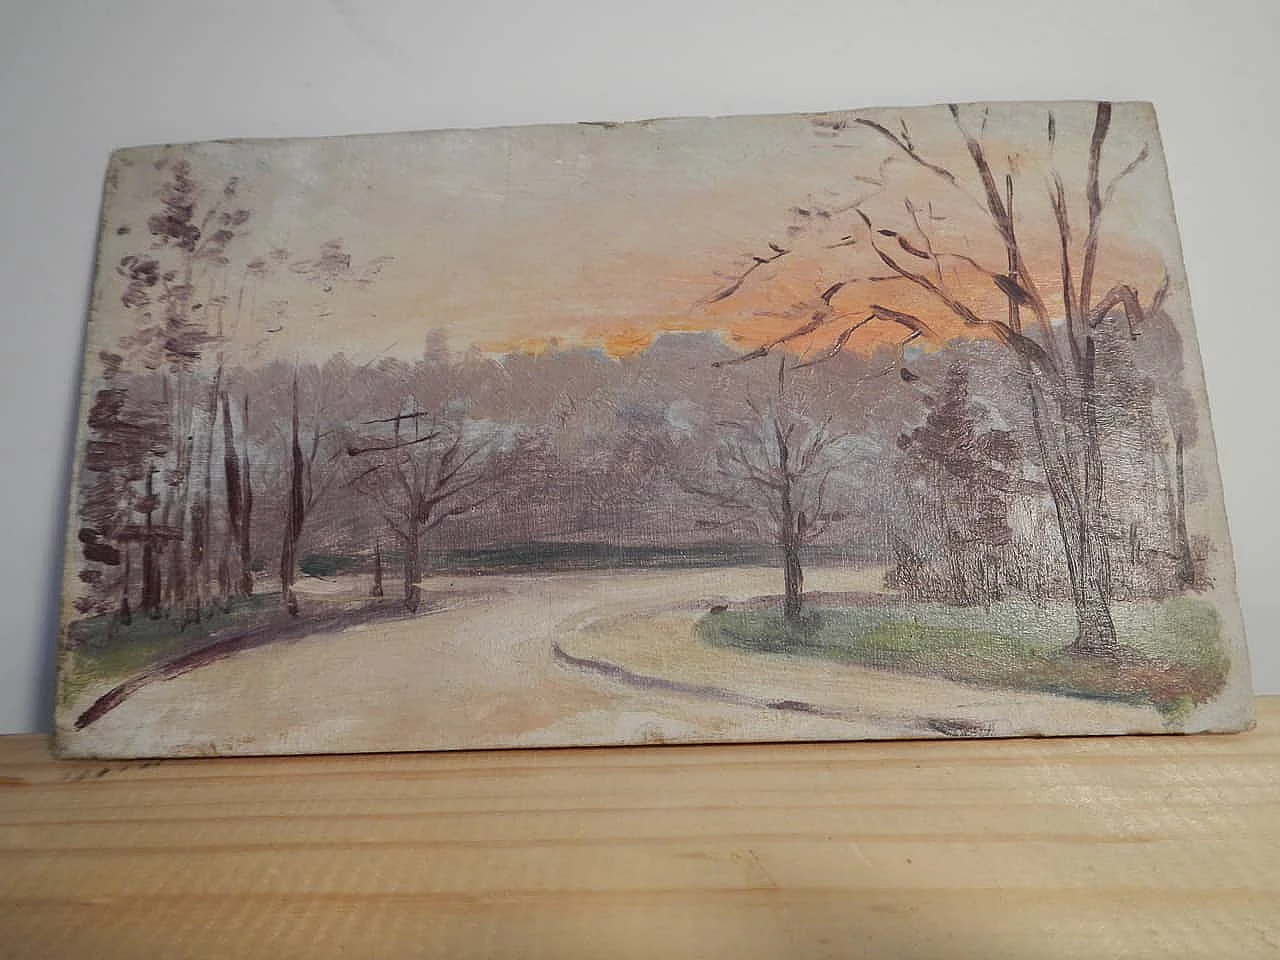 Des Champs, sunset, painting on wood, early 20th century 9